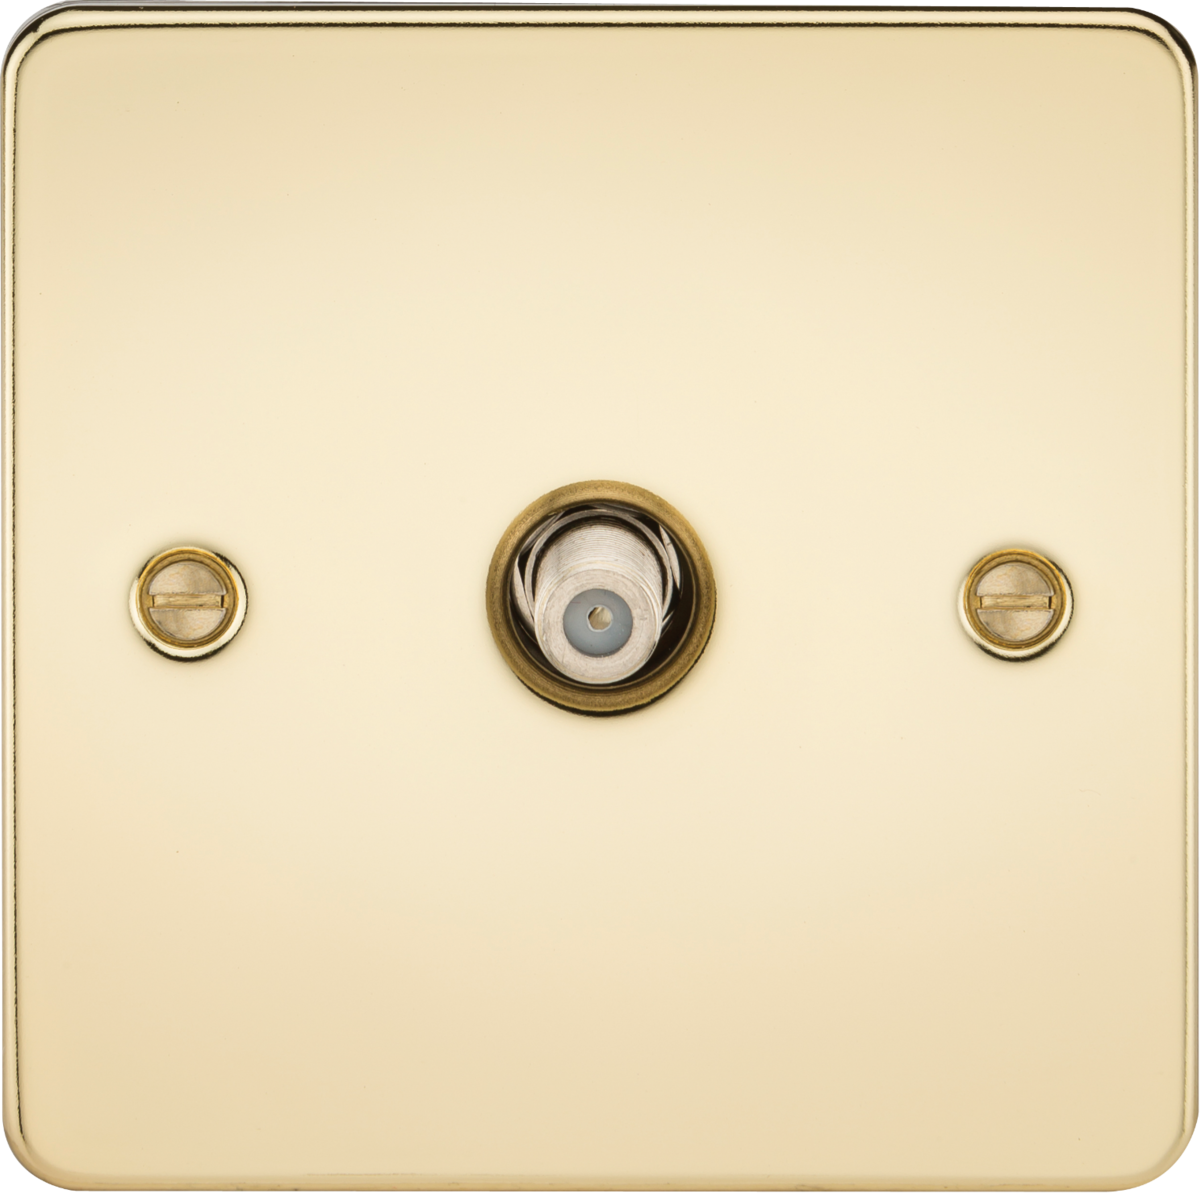 Flat Plate 1G SAT TV Outlet (non-isolated) - Polished Brass